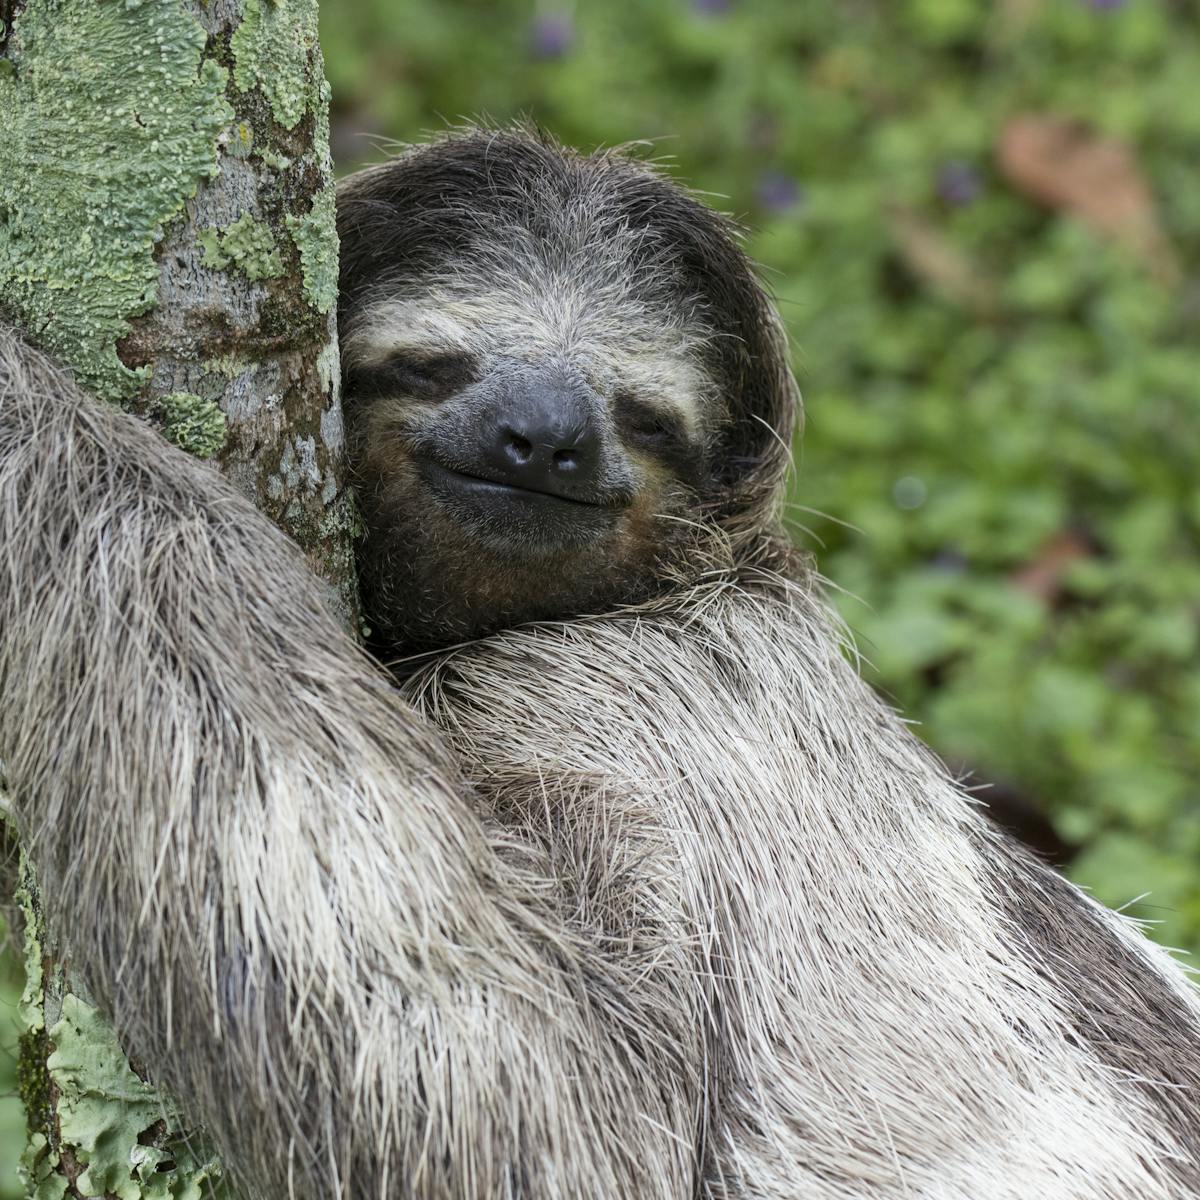 Why everyone should embrace their inner sloth